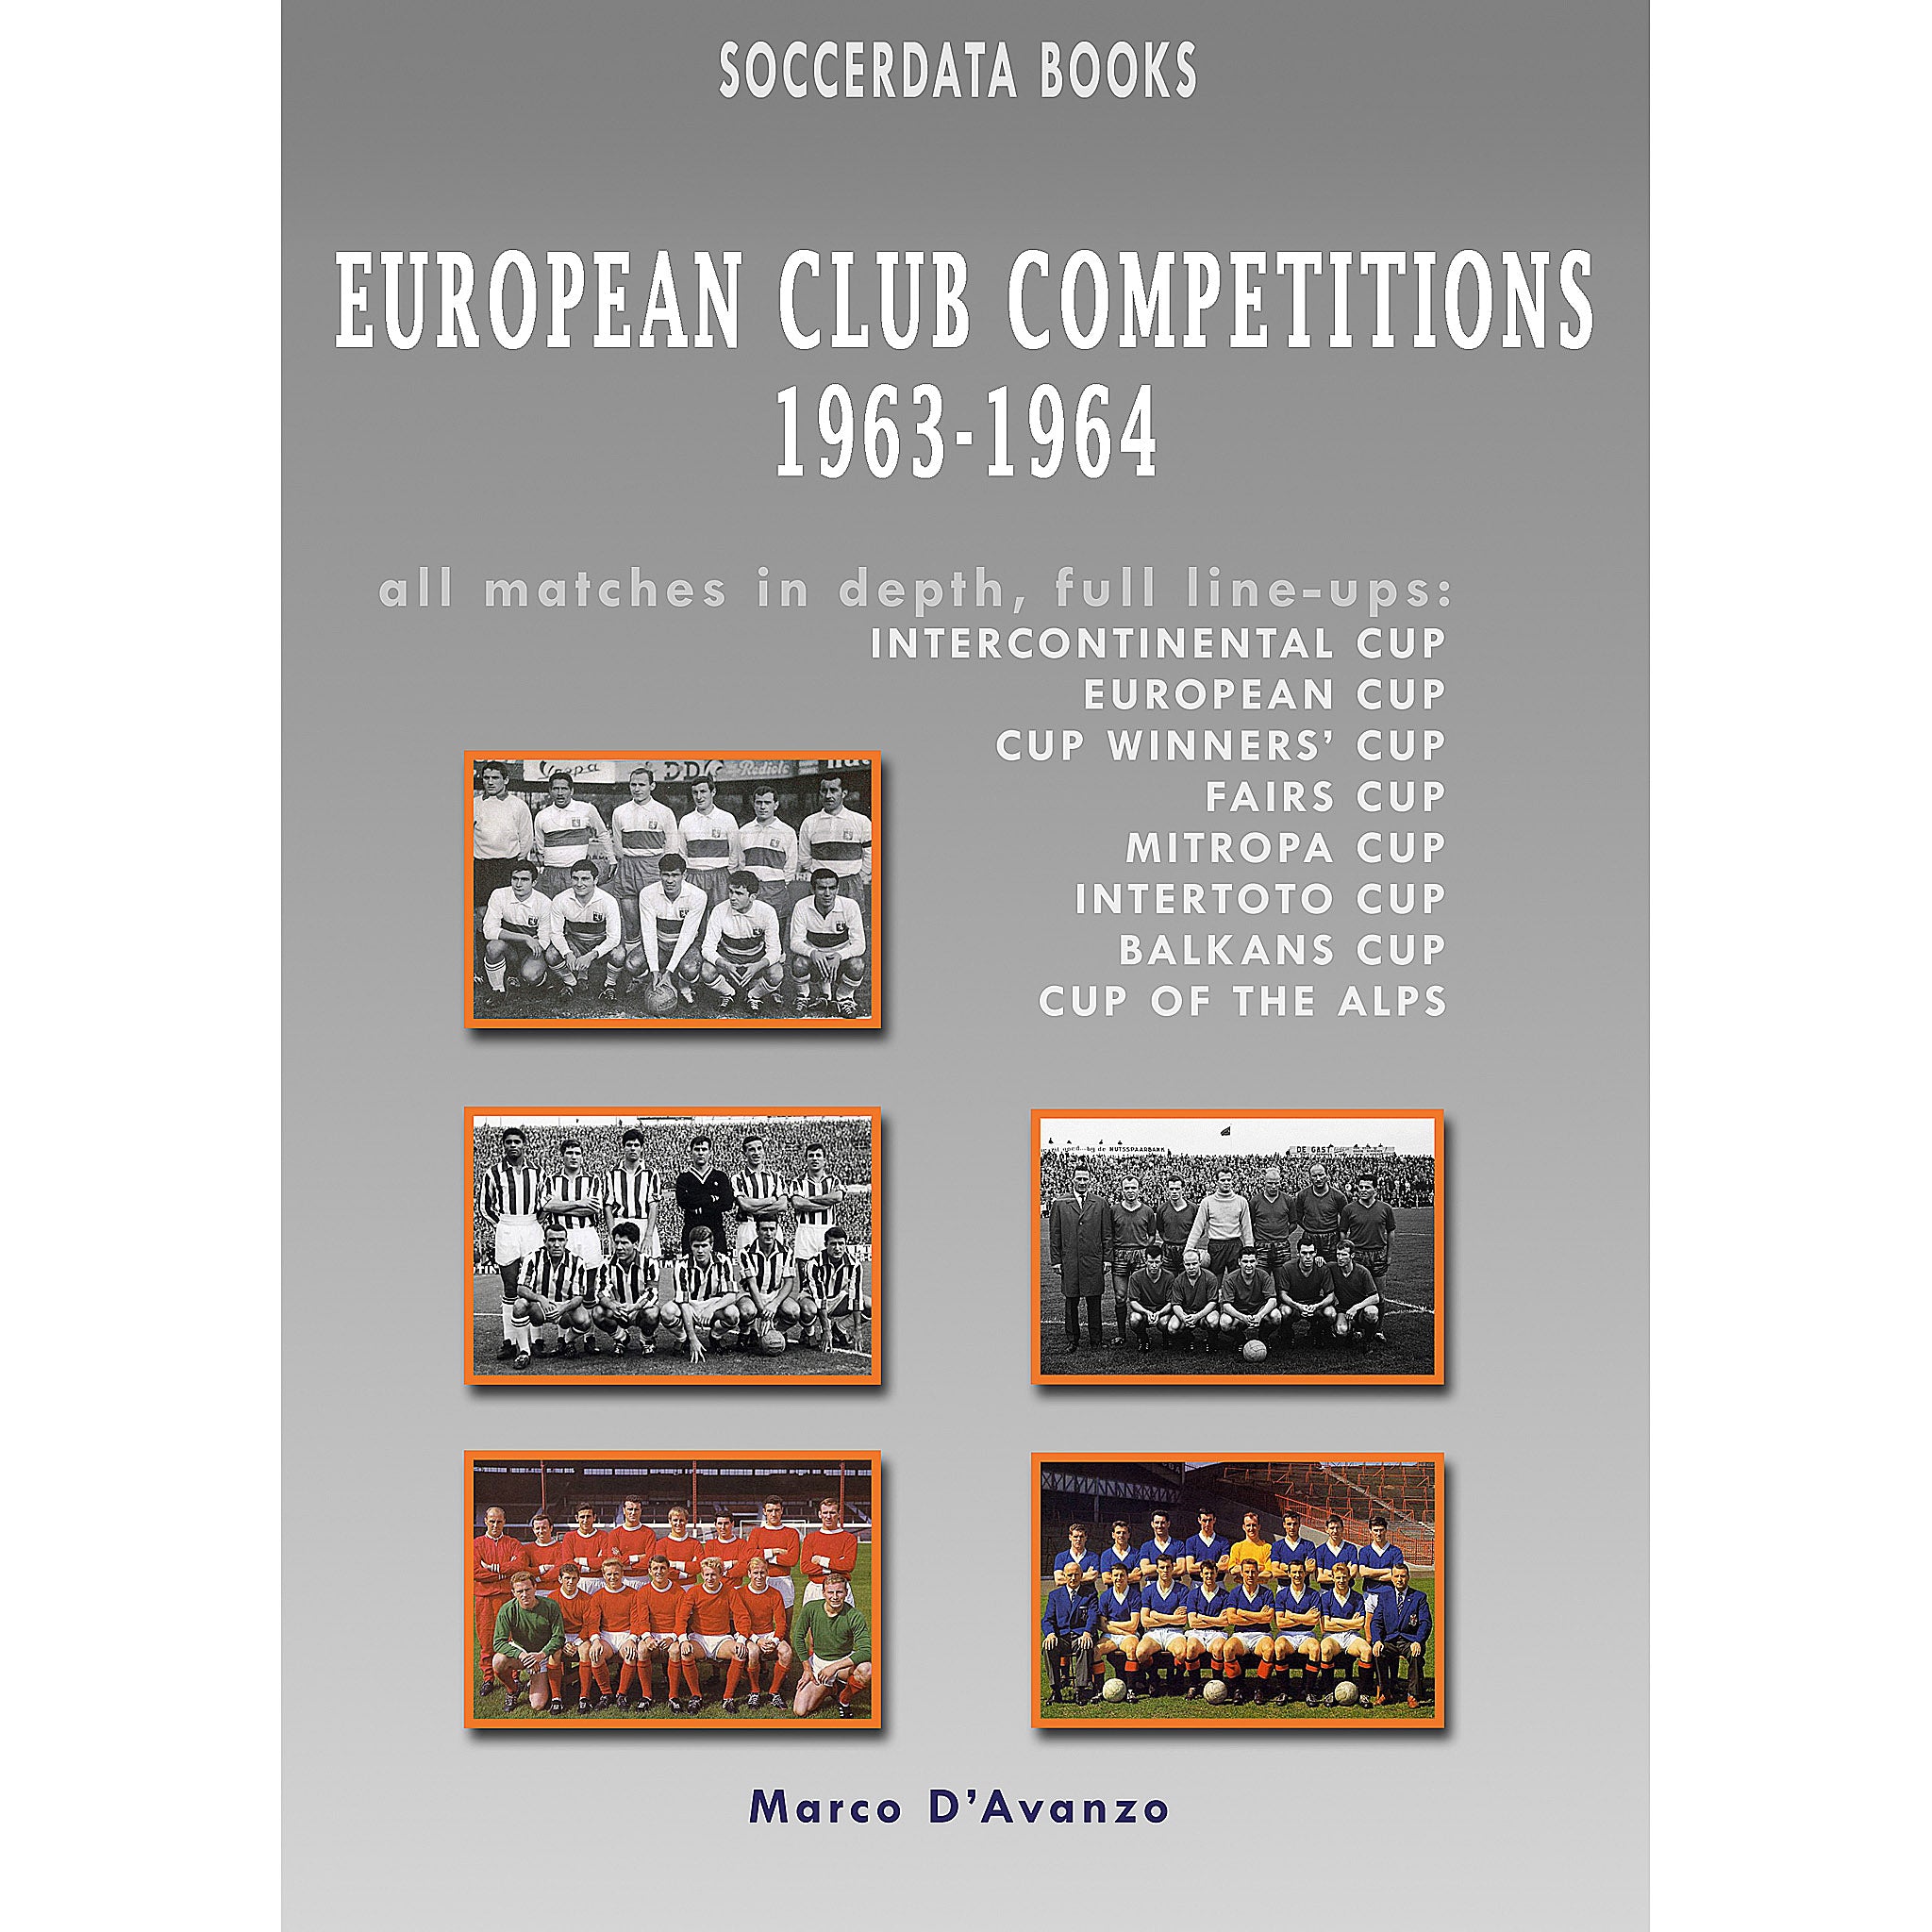 European Club Competitions 1963-1964